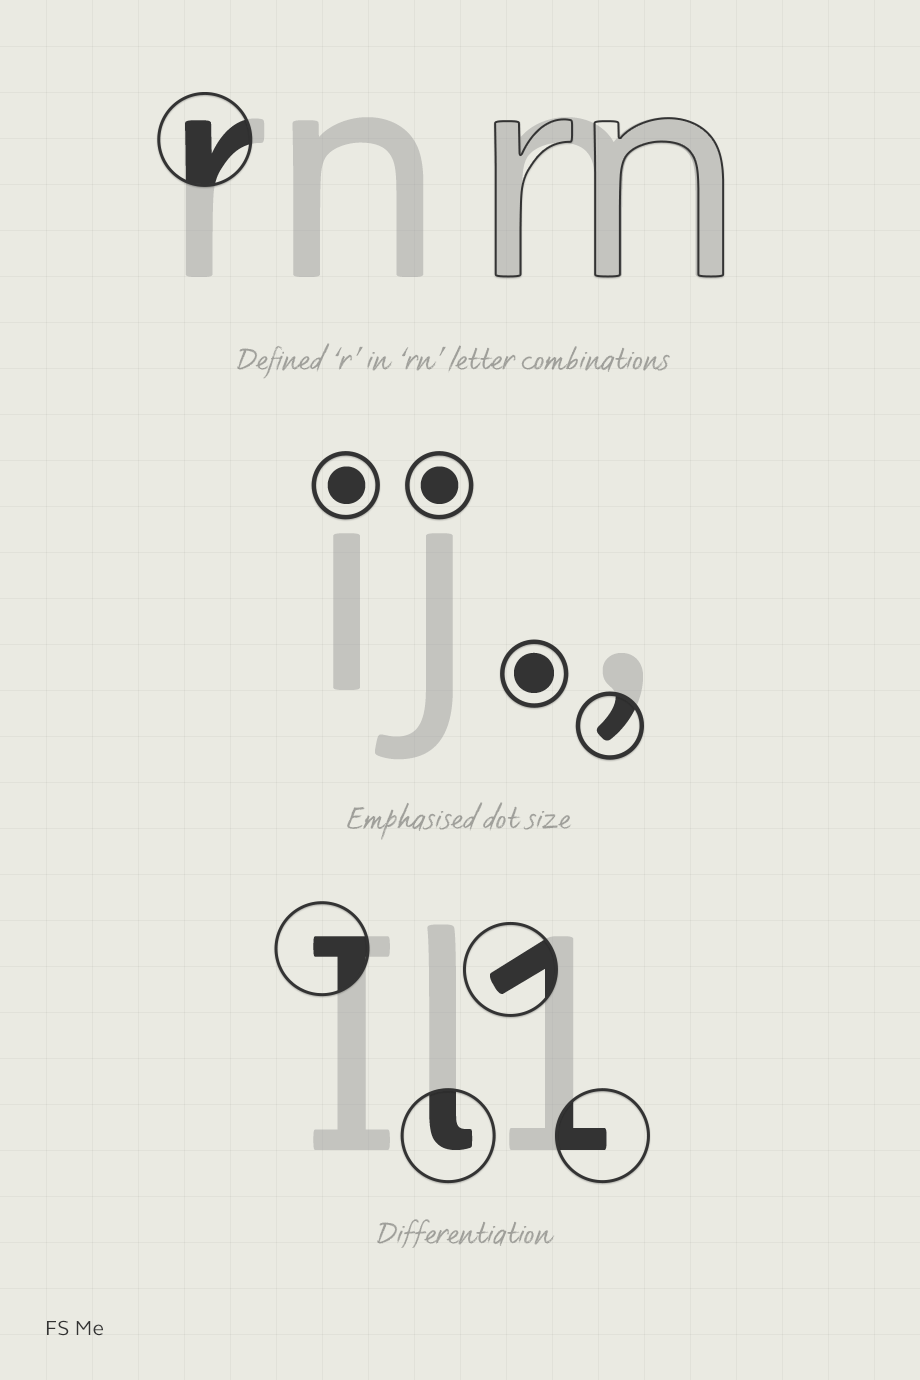 difference between font and typeface